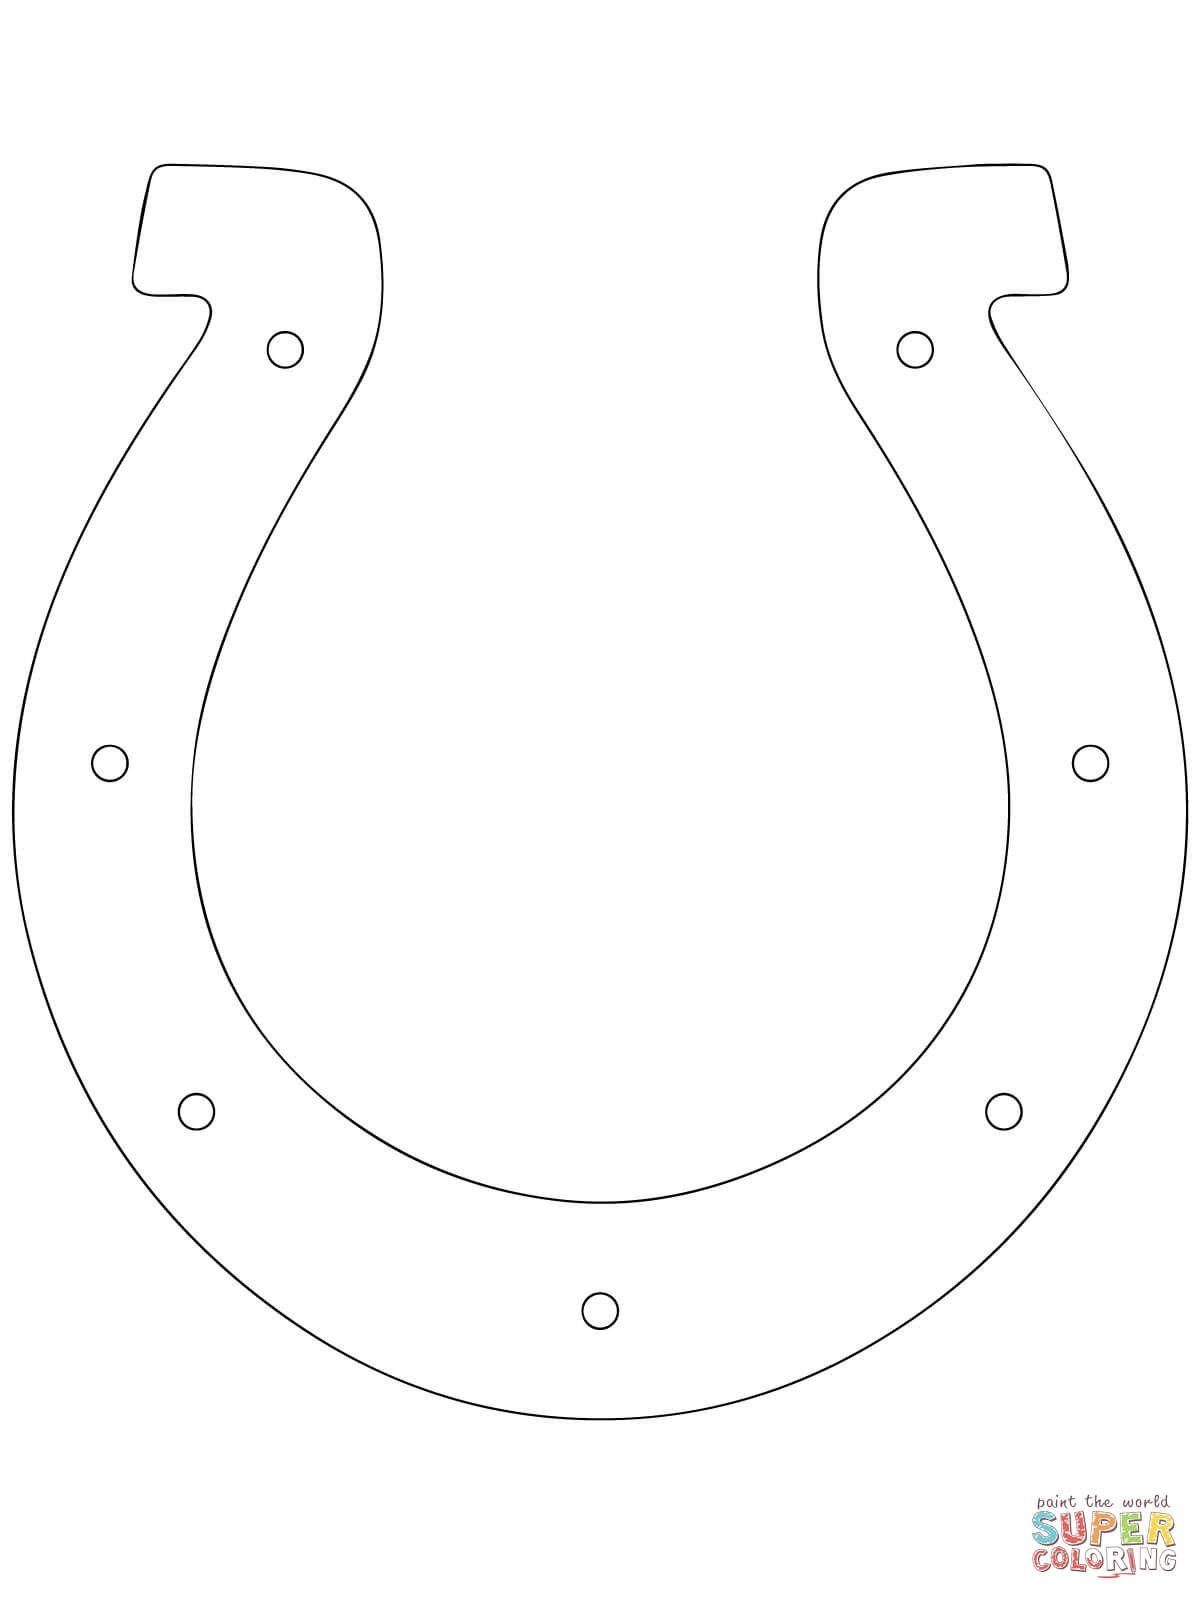 Horseshoe Outline | Super Coloring | Crafts For Kids | Cowboy Crafts - Free Printable Horseshoe Coloring Pages